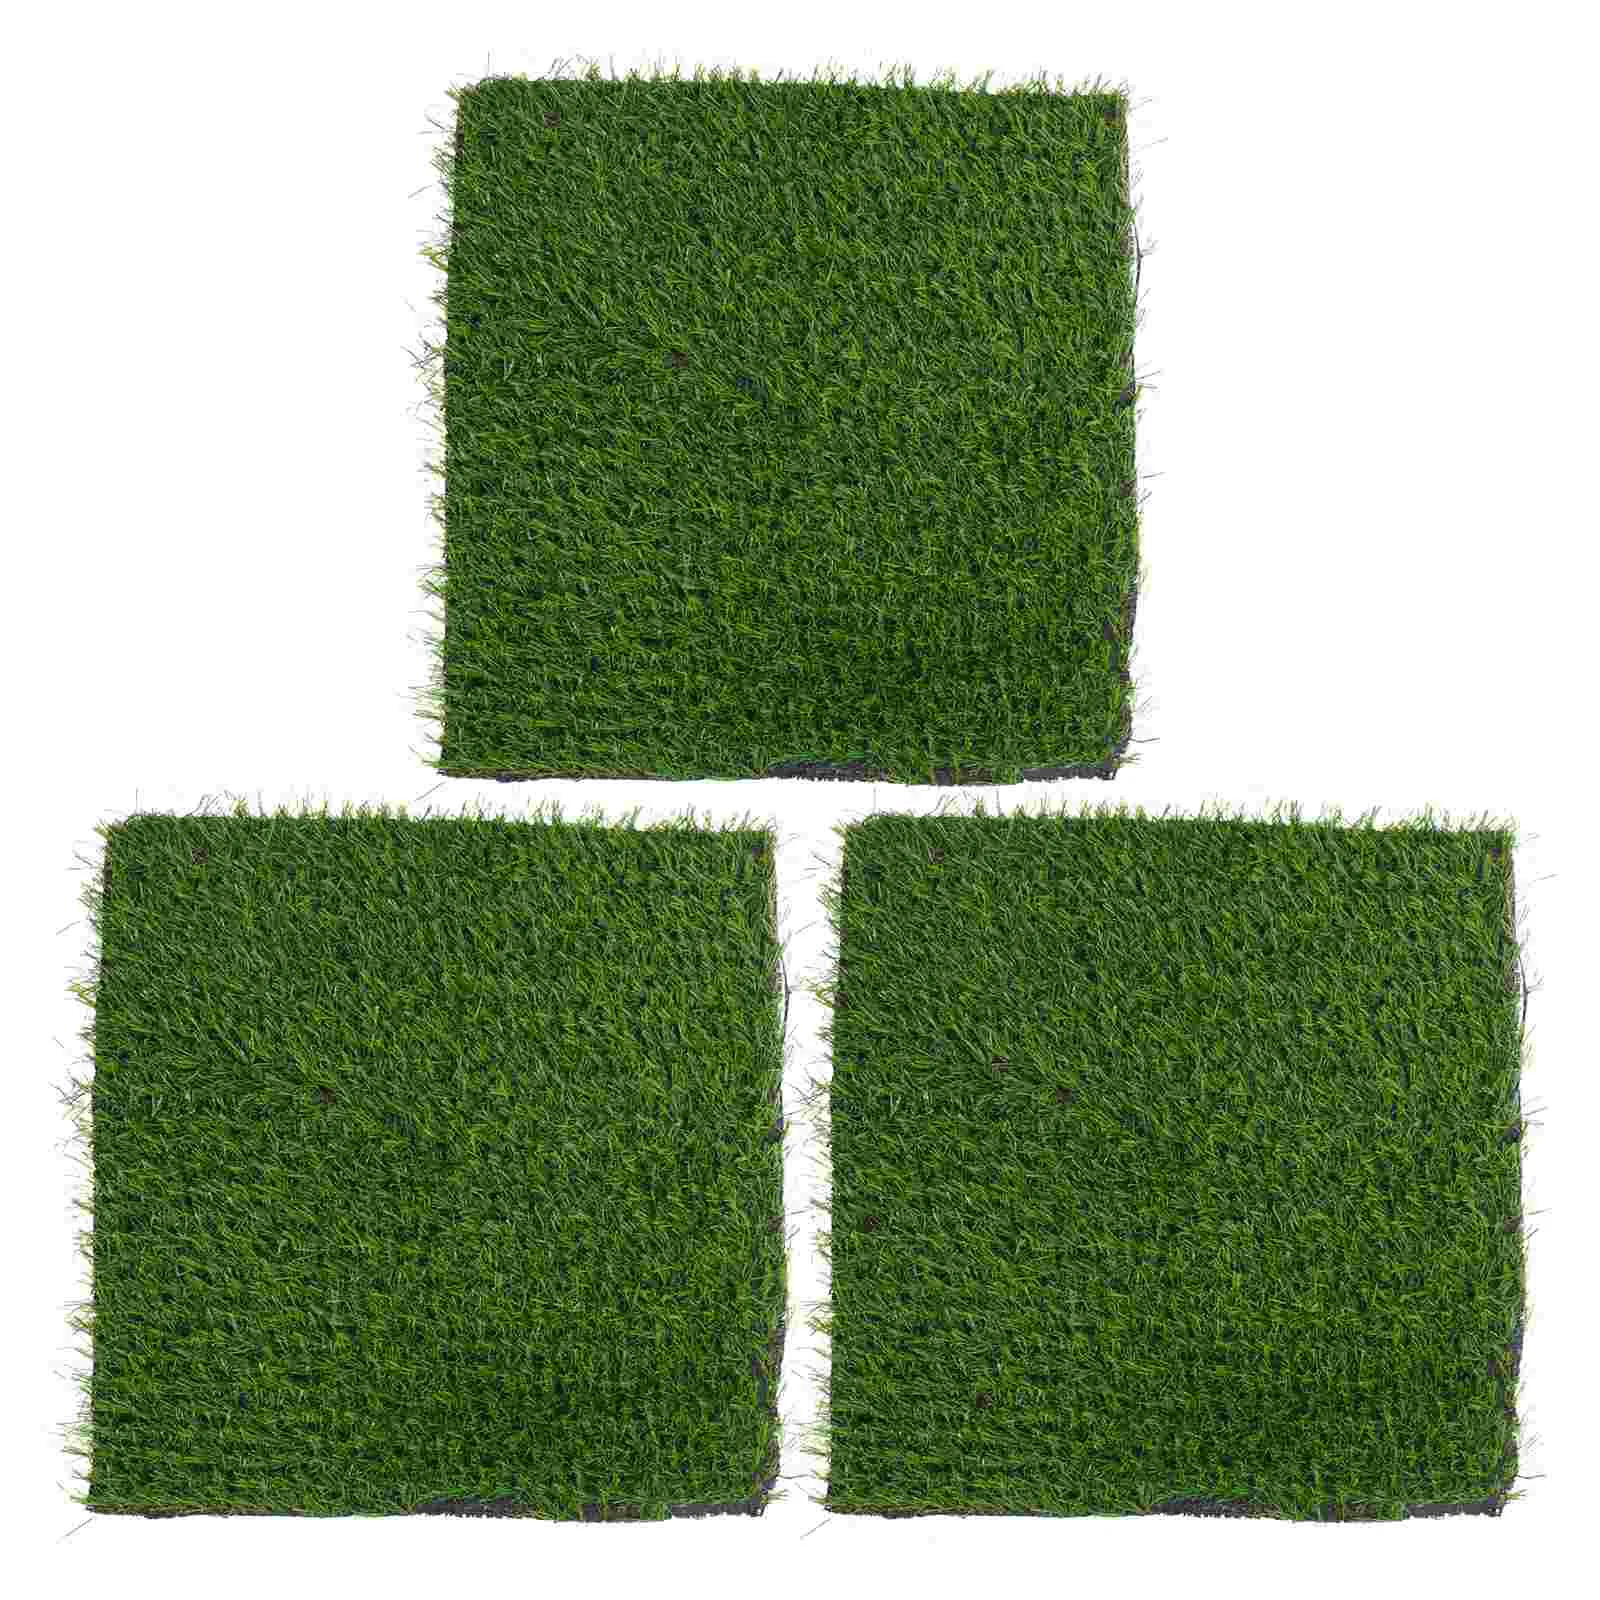 

Chicken Nesting Pads Mat Artificial Mats Egg Washable Fake Bedding Grass Box Eggs Poultry Liner Turf Pad Coop Laying Nest For